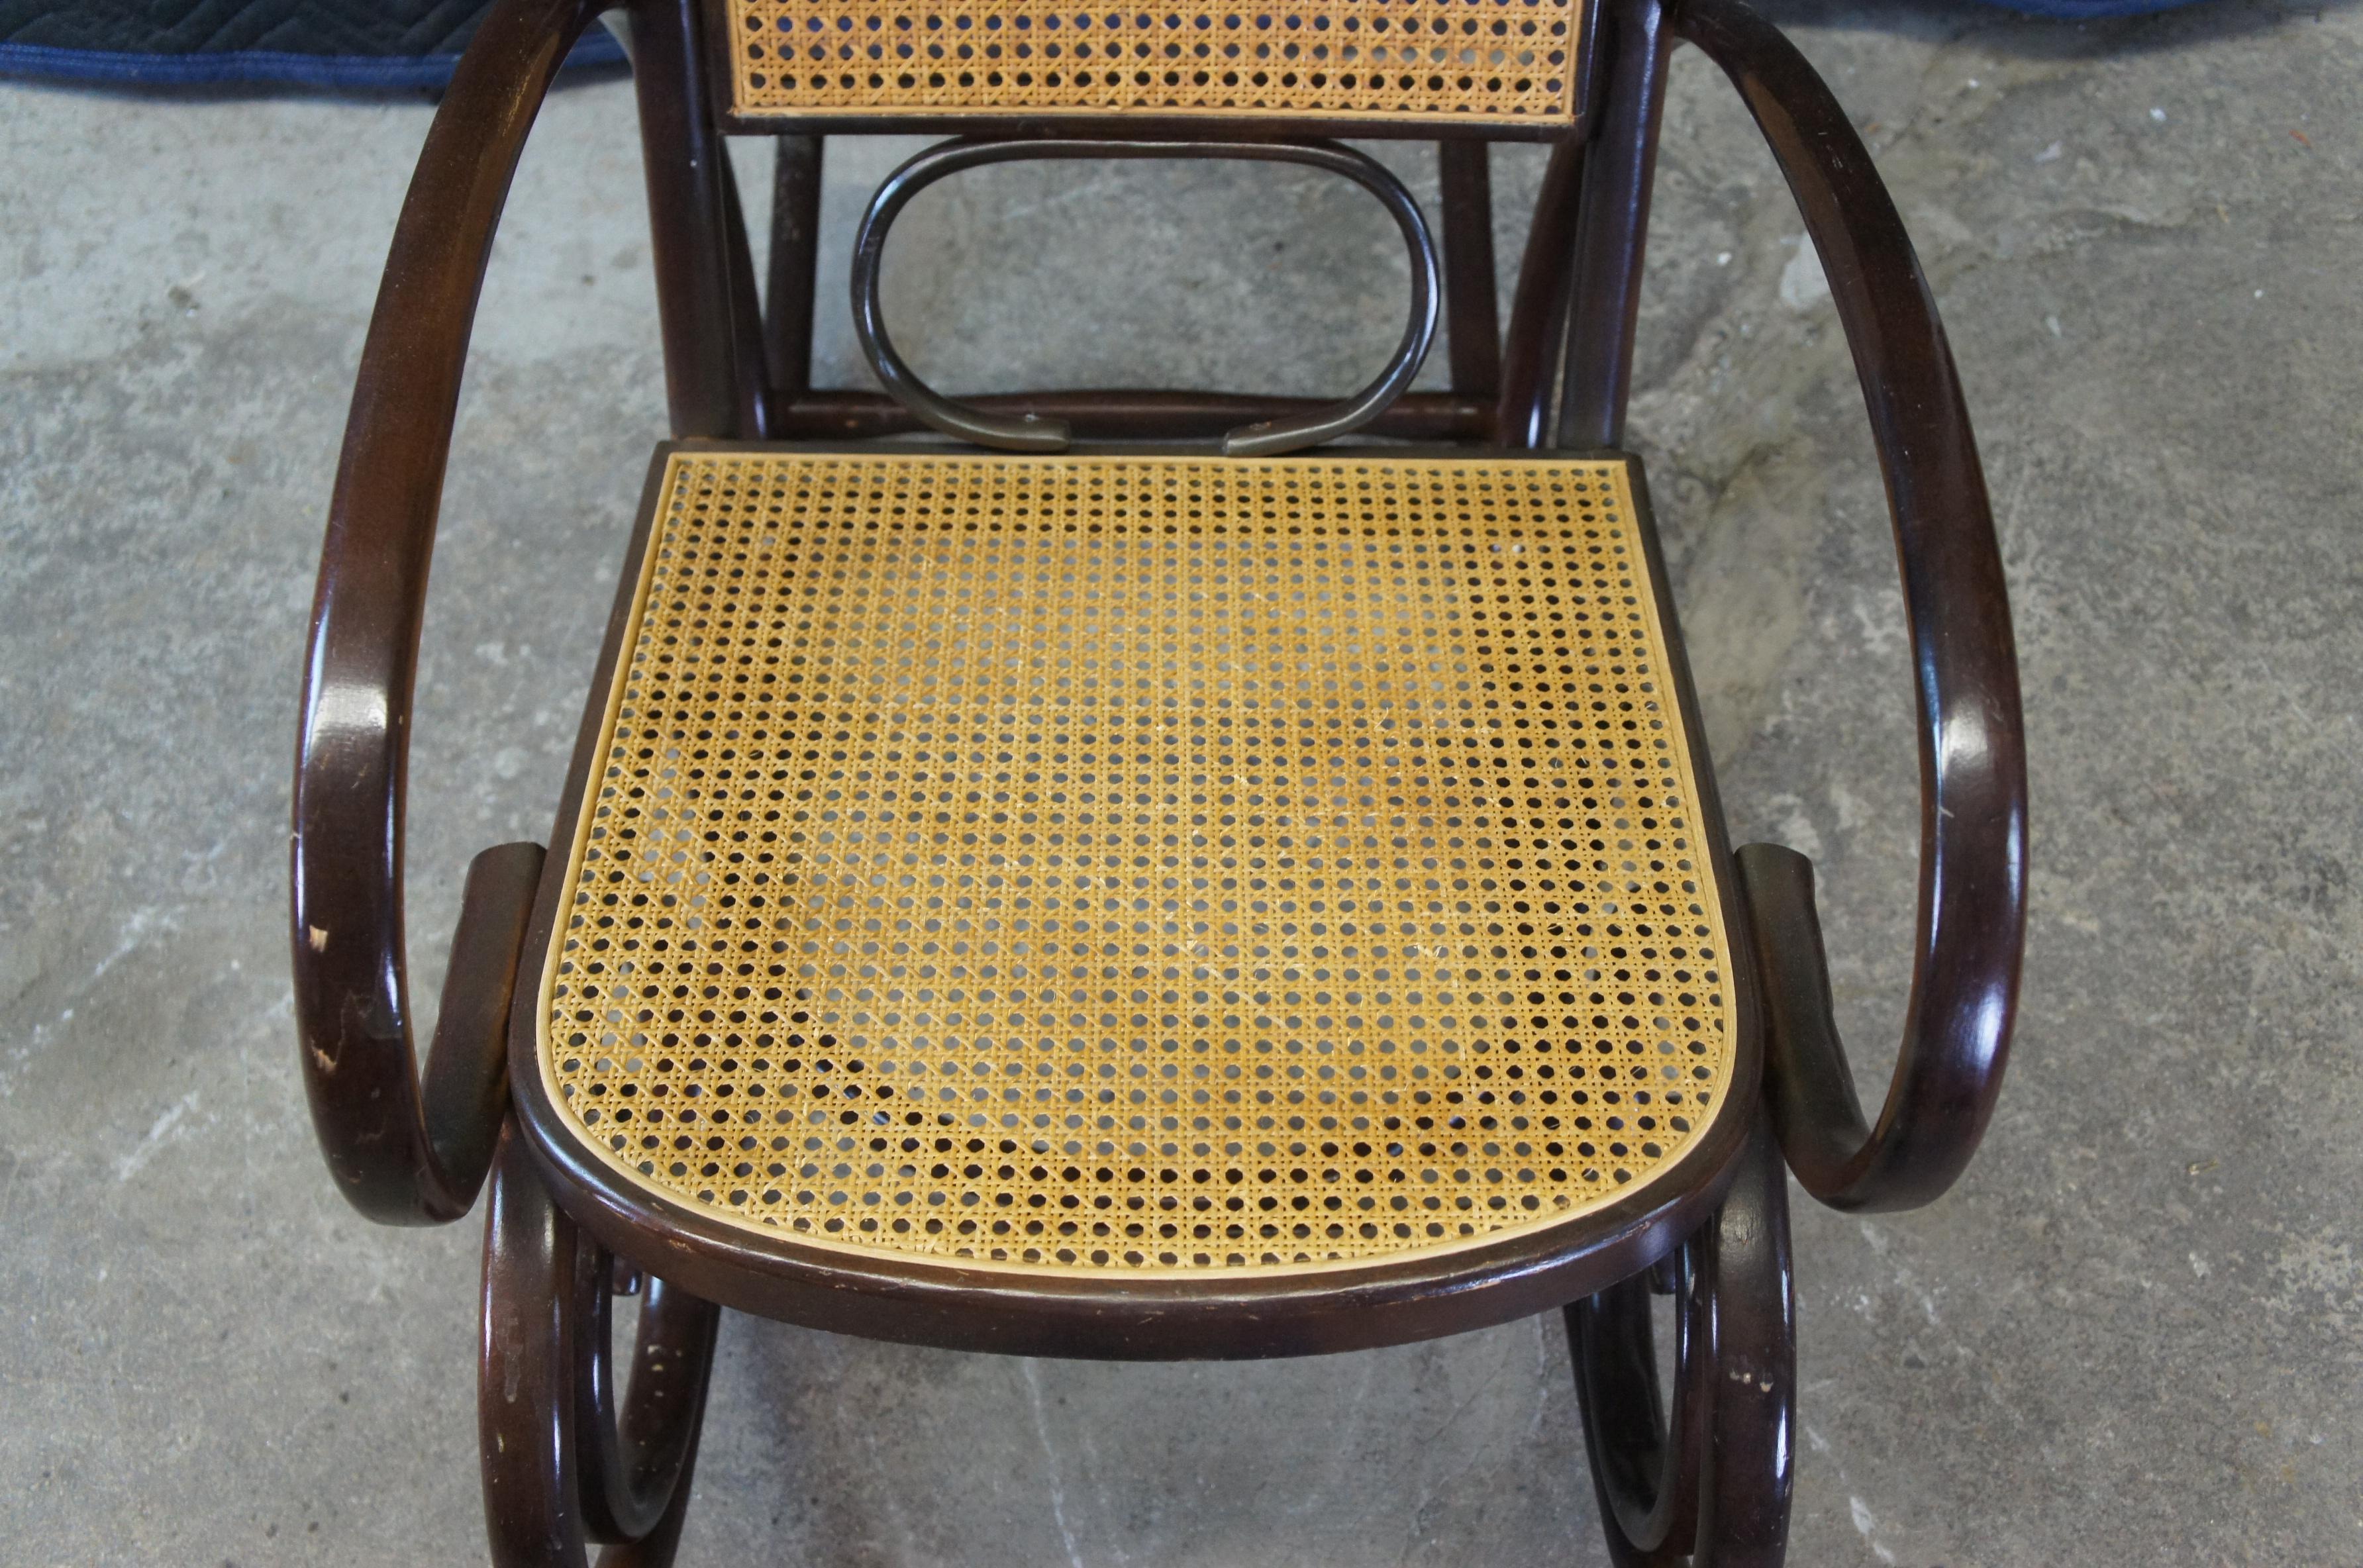 Iconic Thonet Style Bentwood Rocking Chair Natural Cane Rattan Seat Back Rocker For Sale 2